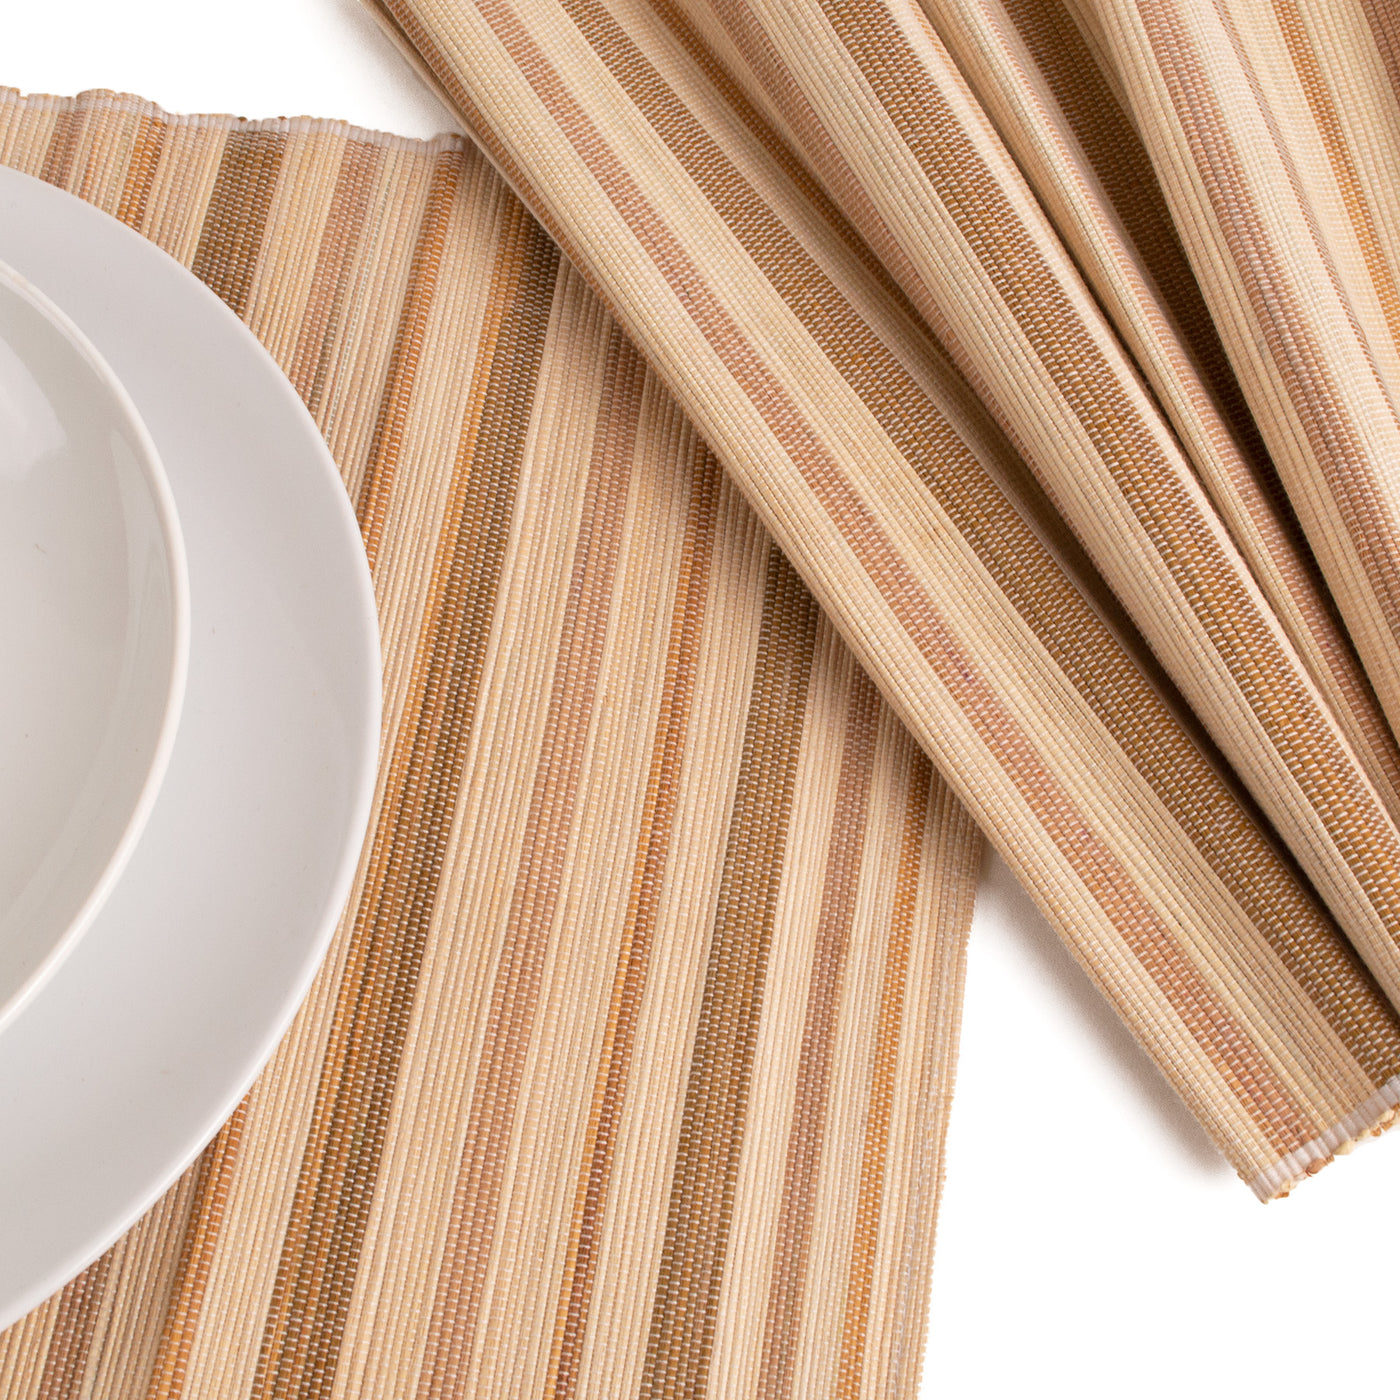 Town Square Placemats - 18" Neutral Stripes, Set of 2